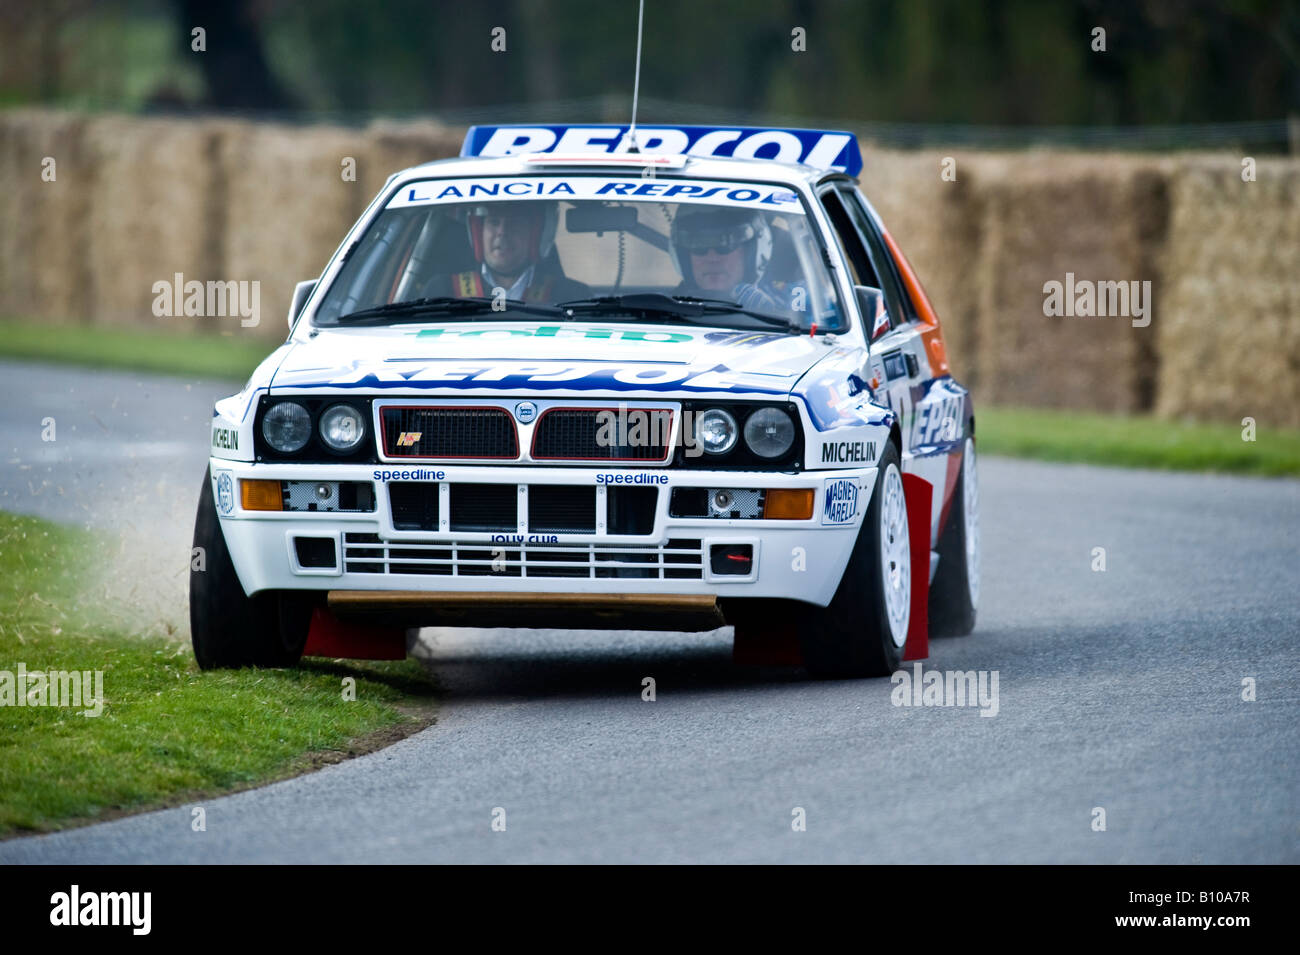 group b lancia delta integrale rally car at goodwood festival of speed Stock Photo